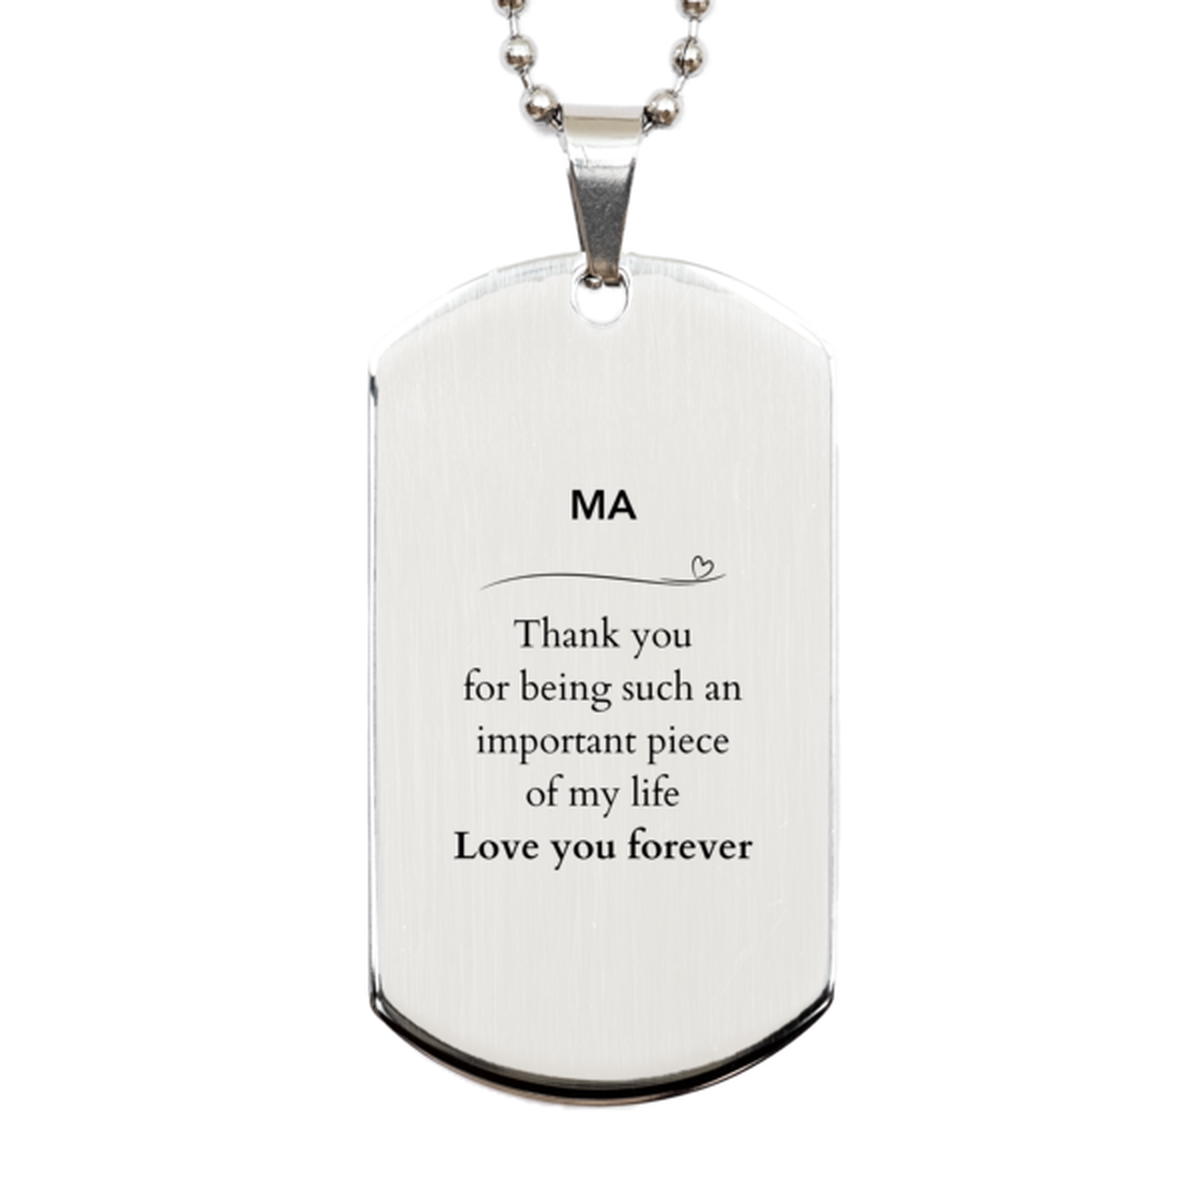 Appropriate Ma Silver Dog Tag Epic Birthday Gifts for Ma Thank you for being such an important piece of my life Ma Christmas Mothers Fathers Day